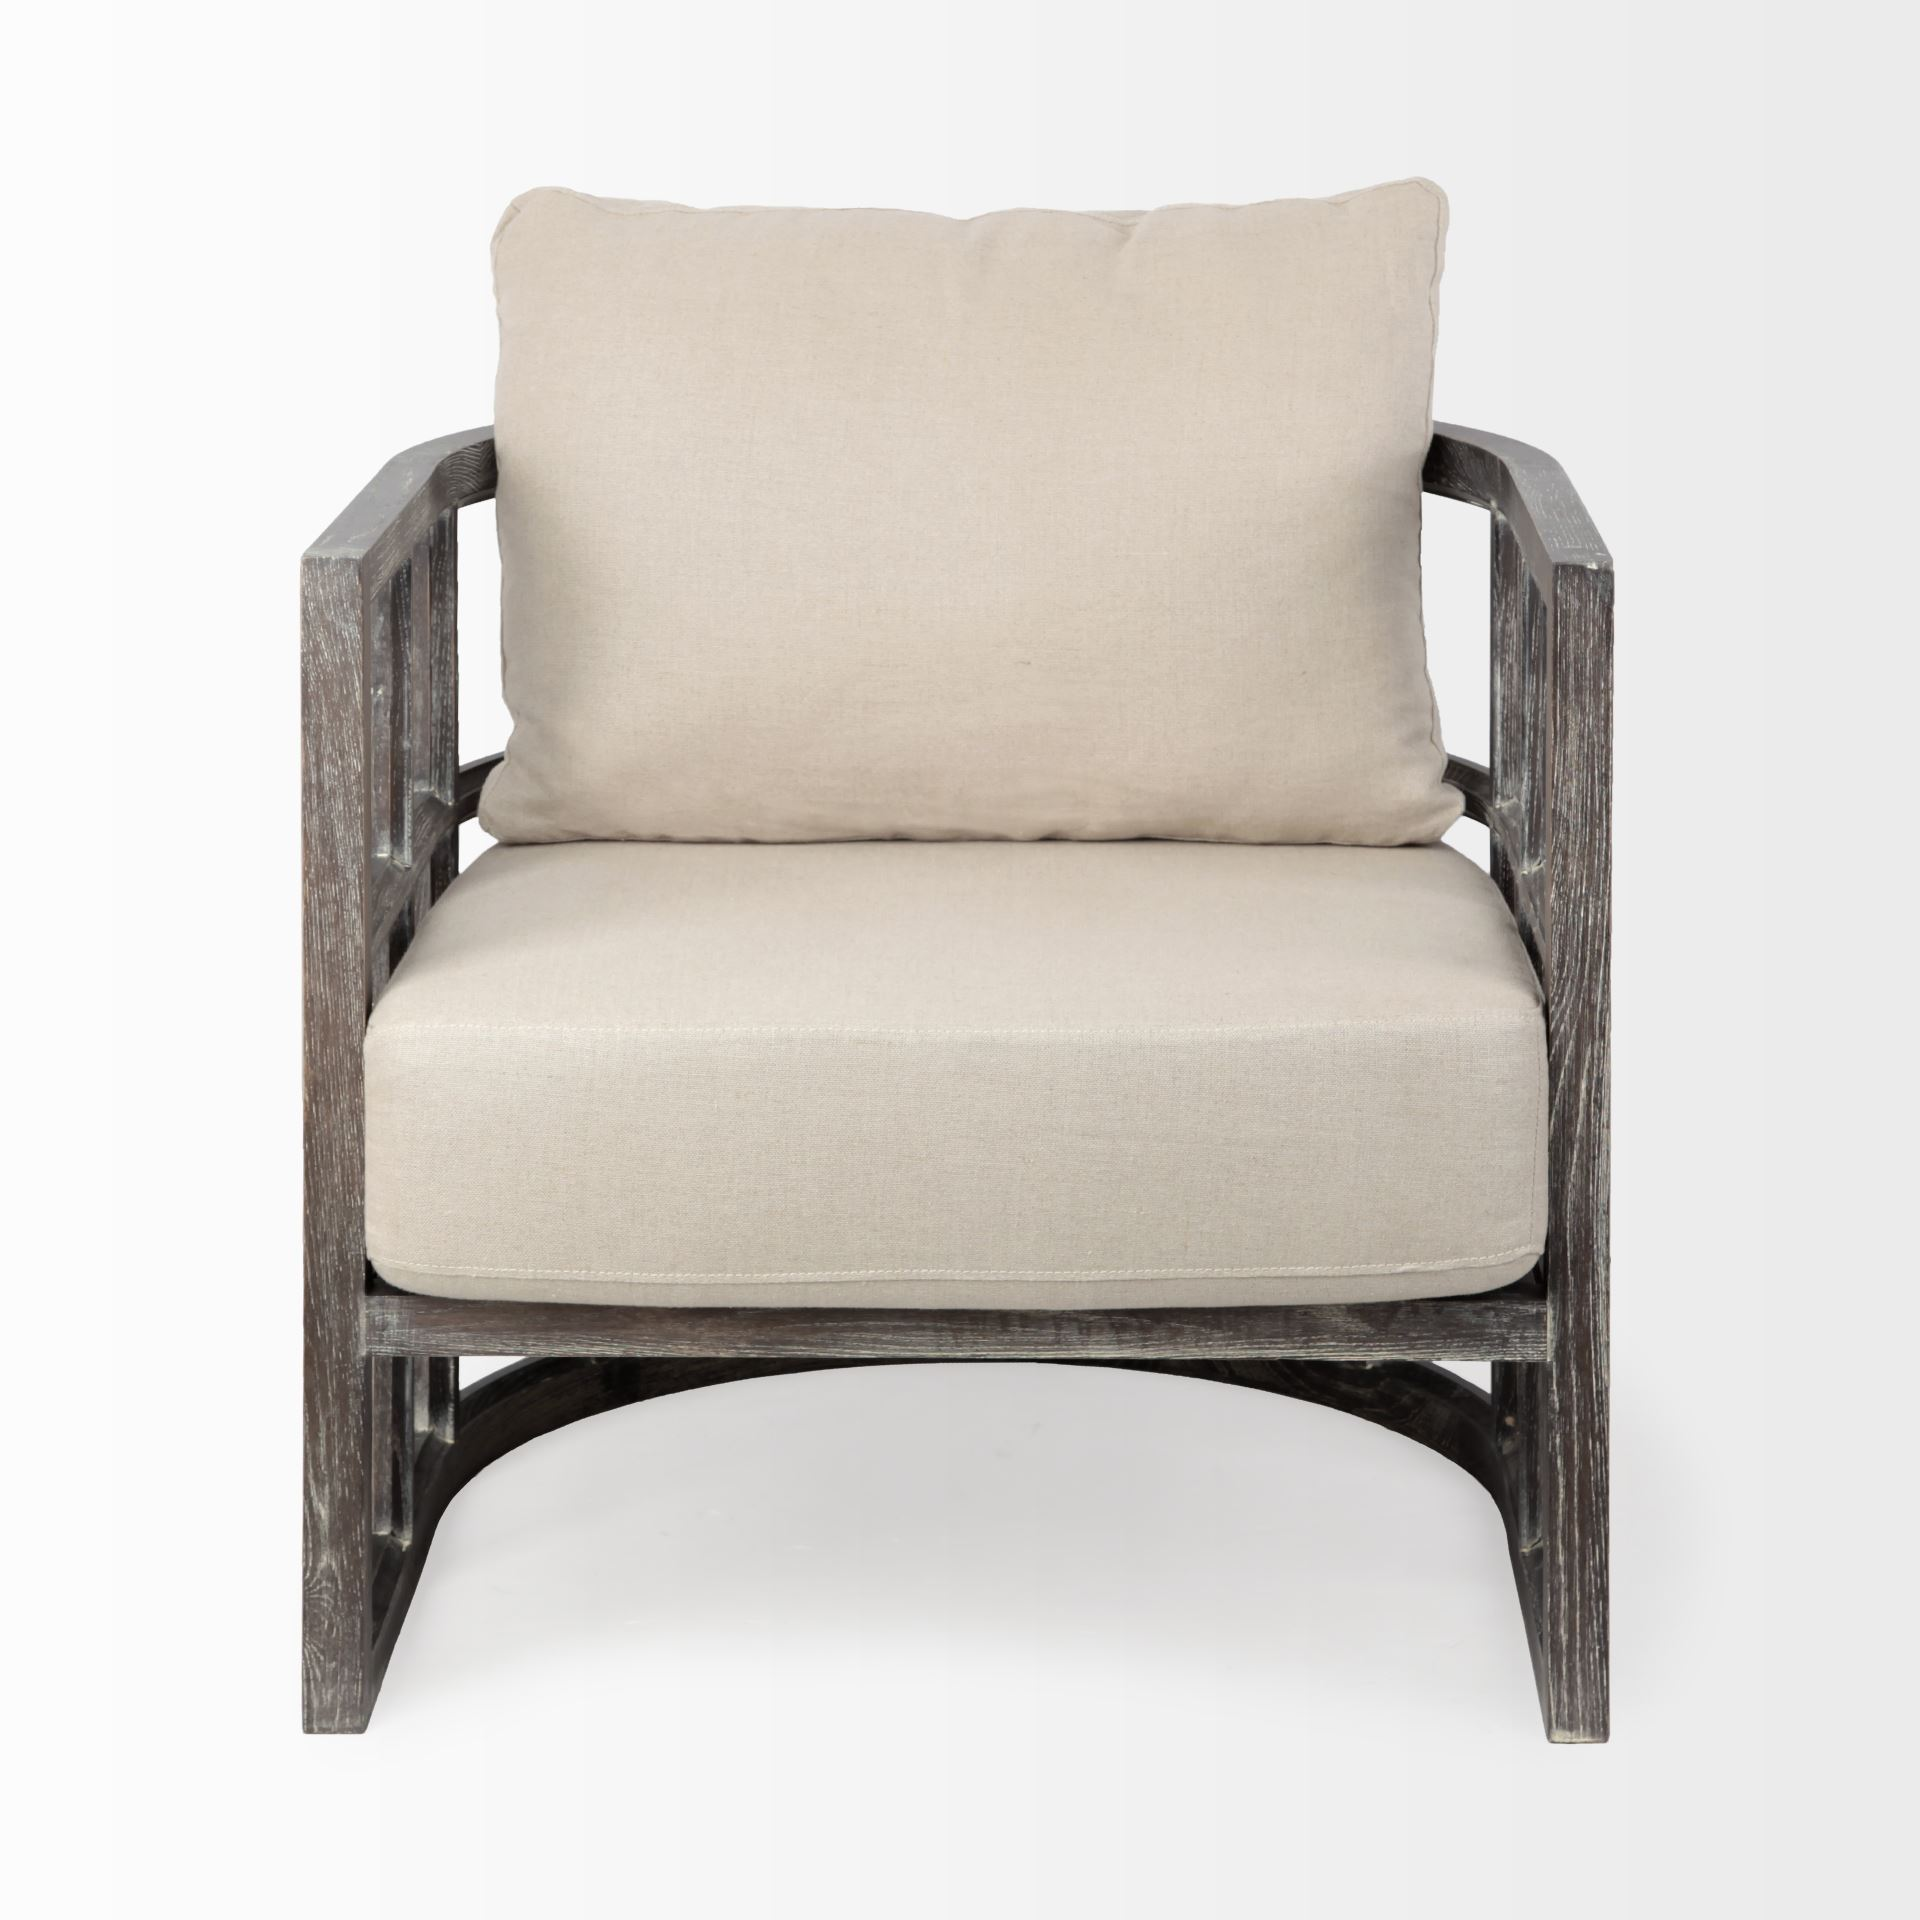 Elegant Ivory Demi Lune Accent Chair with Wooden Frame